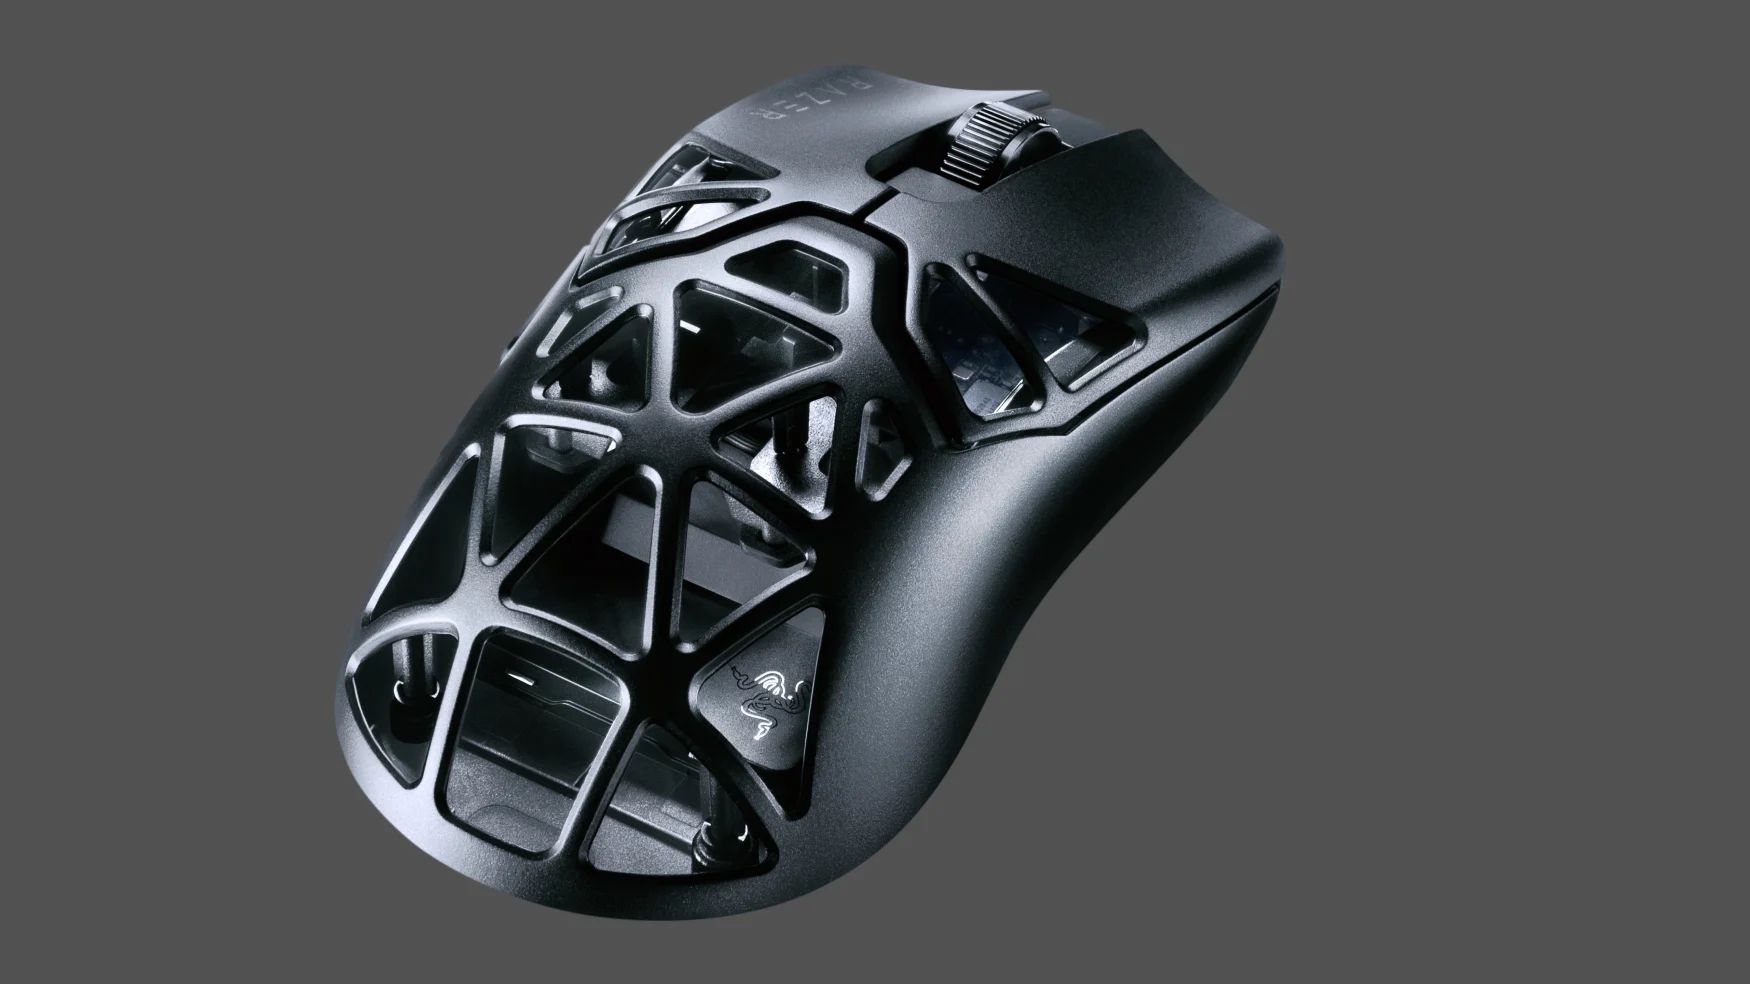 Marketing render of a new Razer gaming mouse with a magnesium exoskeleton and partially hollow interior.